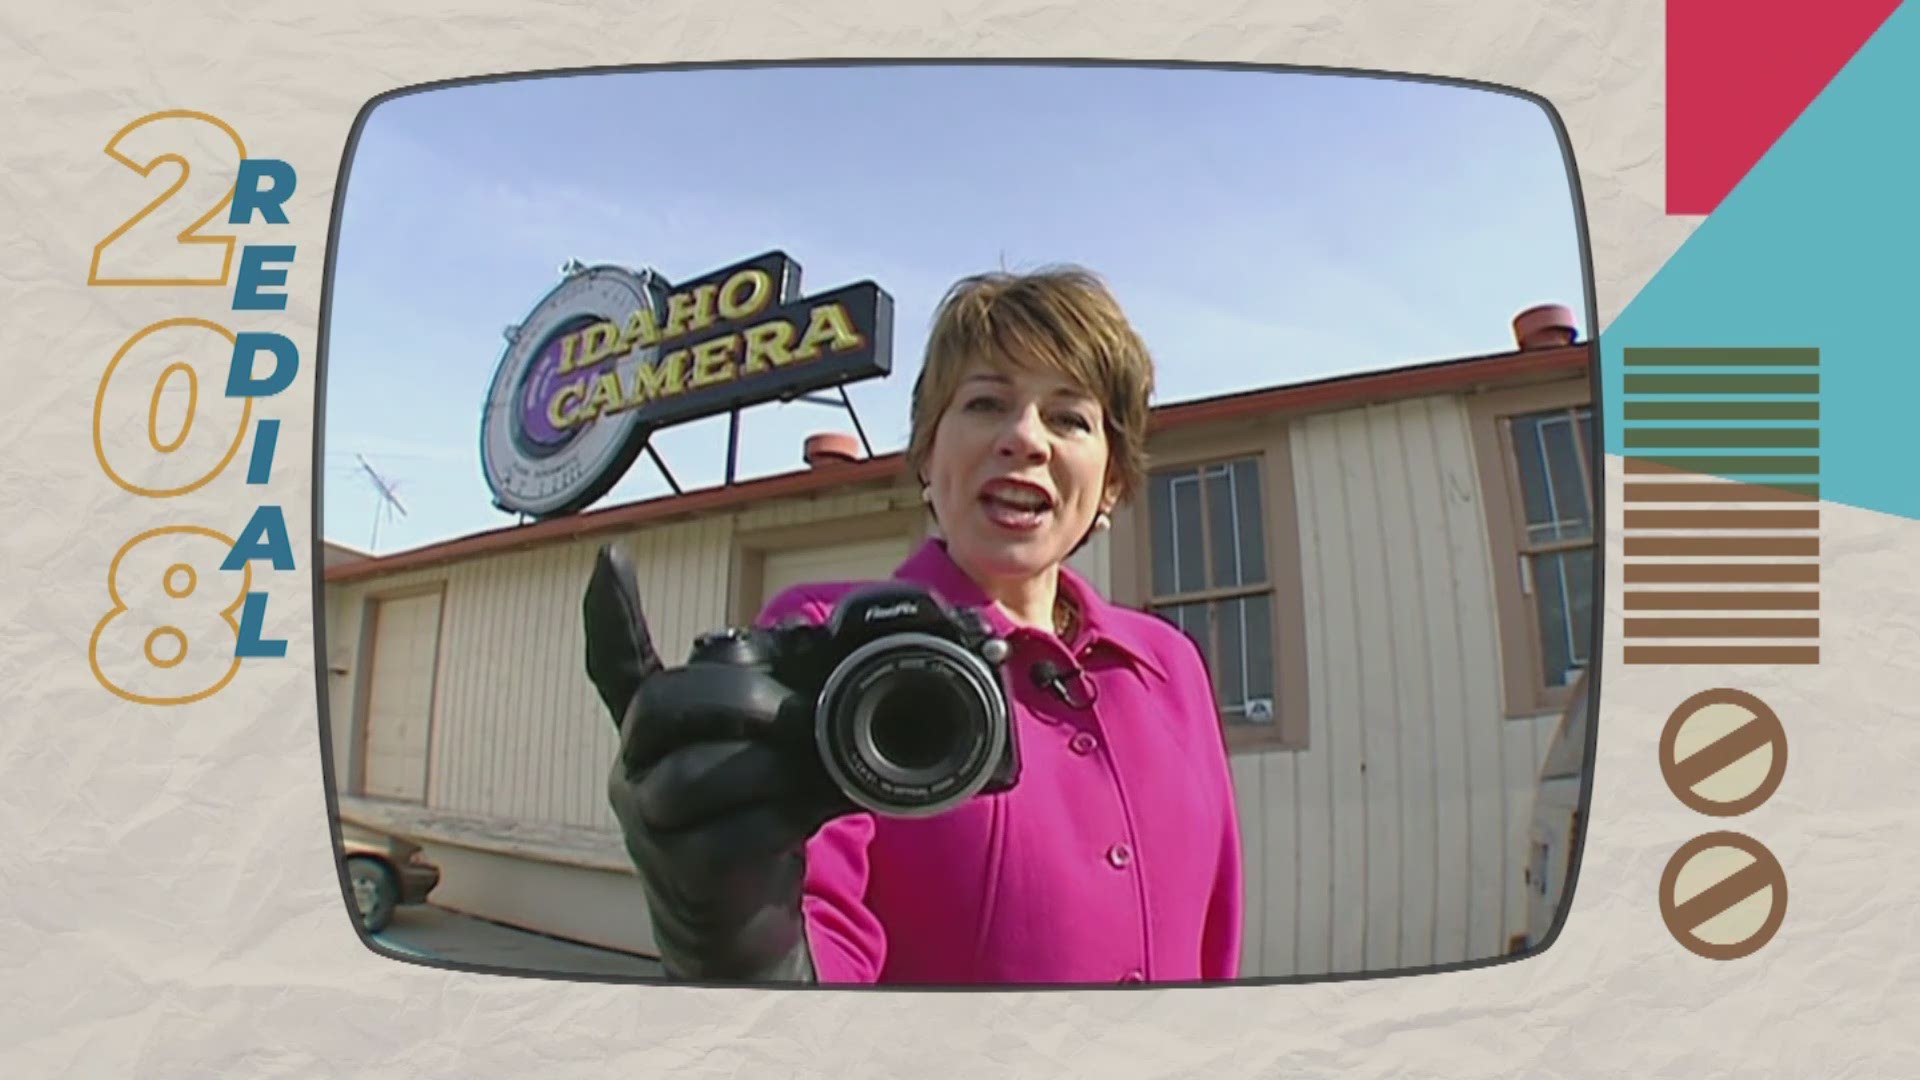 As one of the last Idaho camera shops permanently closes its doors, KTVB is looking back on its legacy in the Treasure Valley.